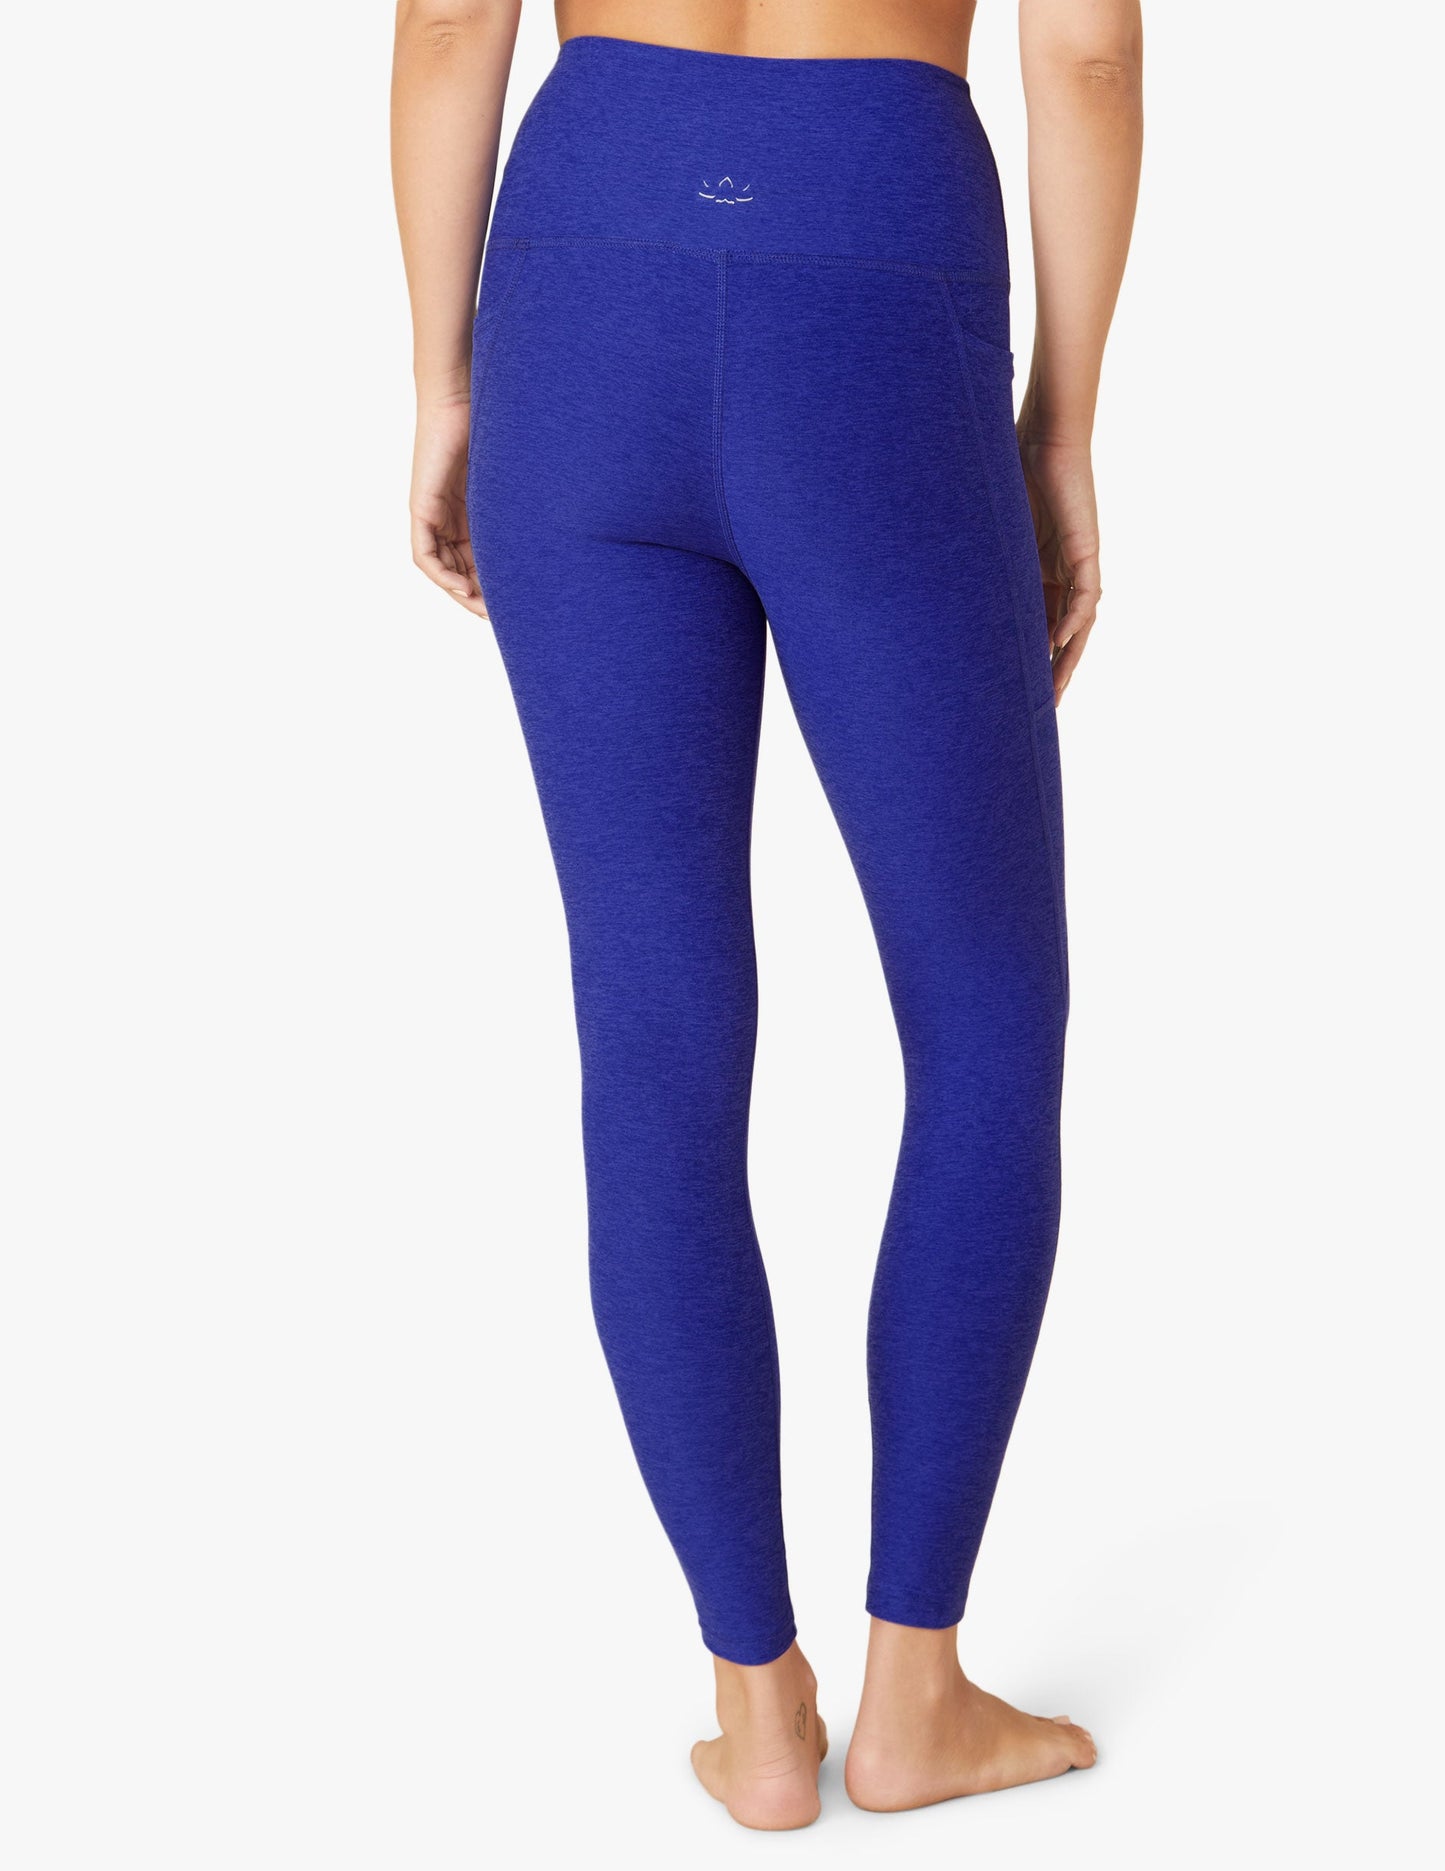 BEYOND YOGA OUT OF POCKET MIDI HIGH WAISTED LEGGING SAPPHIRE BLUE HEATHER